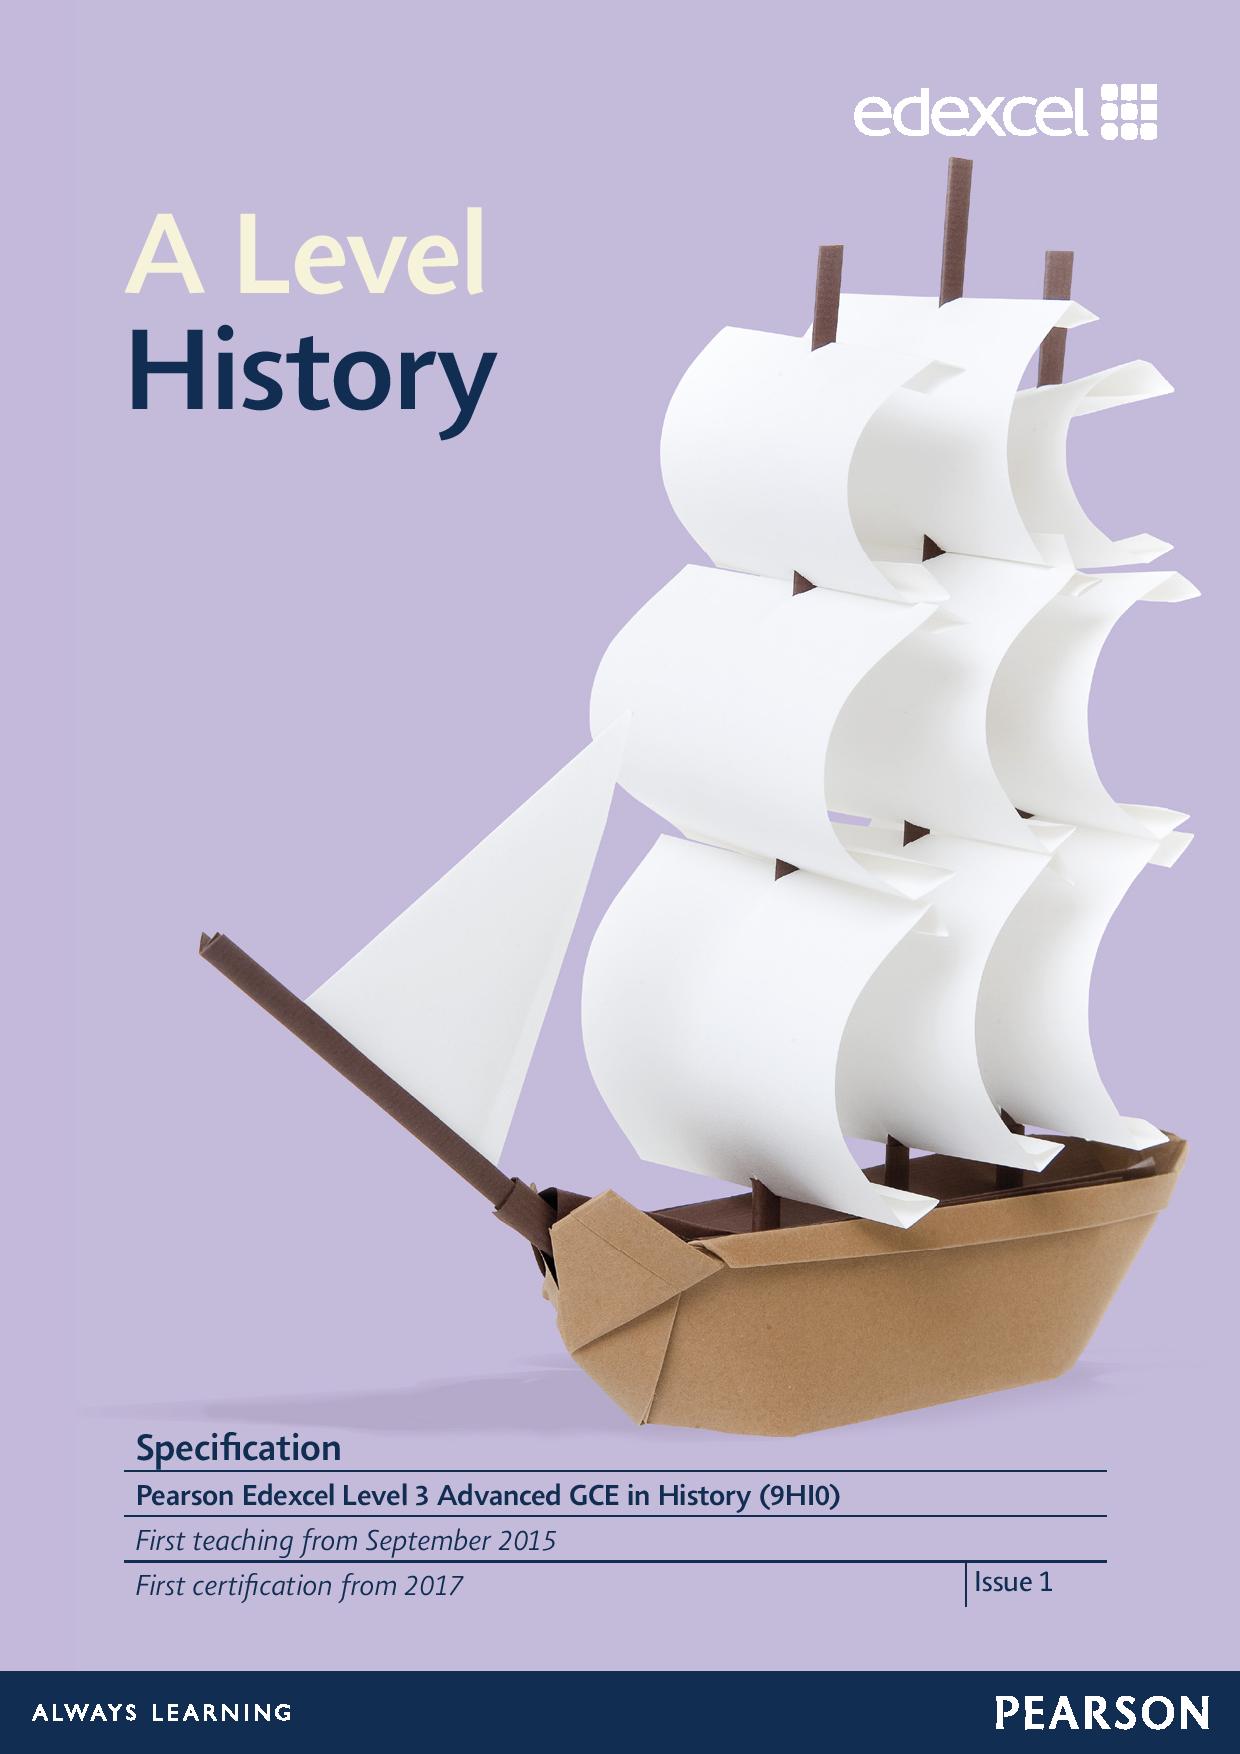 Link to Edexcel A level History specification page